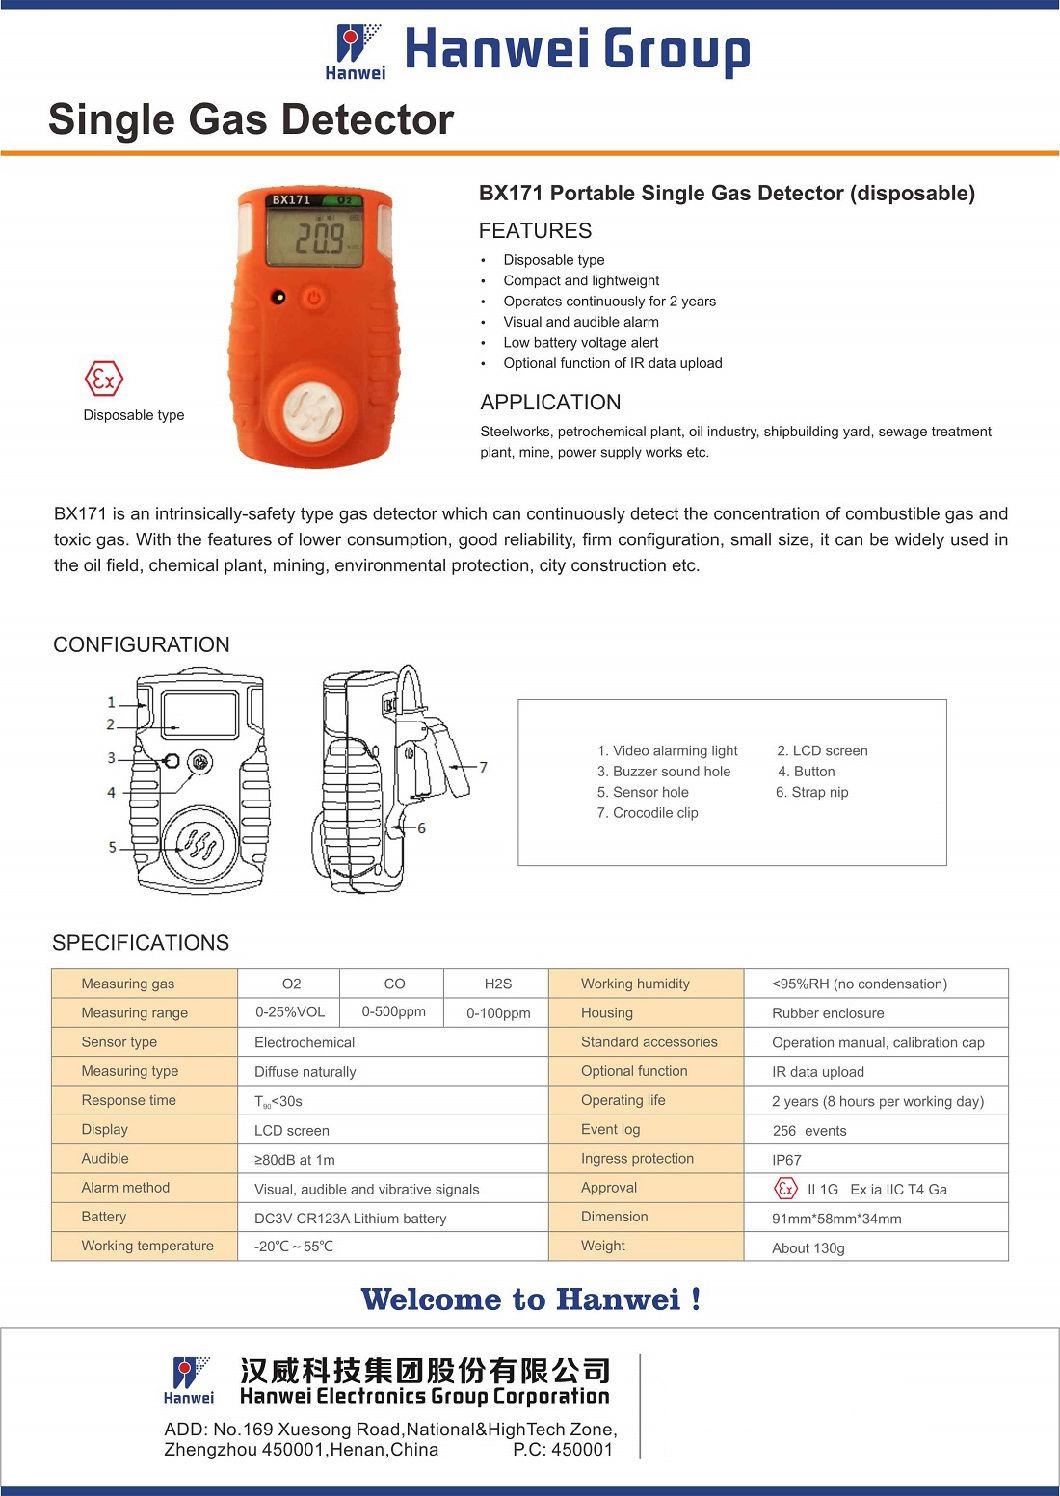 Portable Digital Single Toxic Gas (H2S, CO) Detector for Personal Safety (BX171)